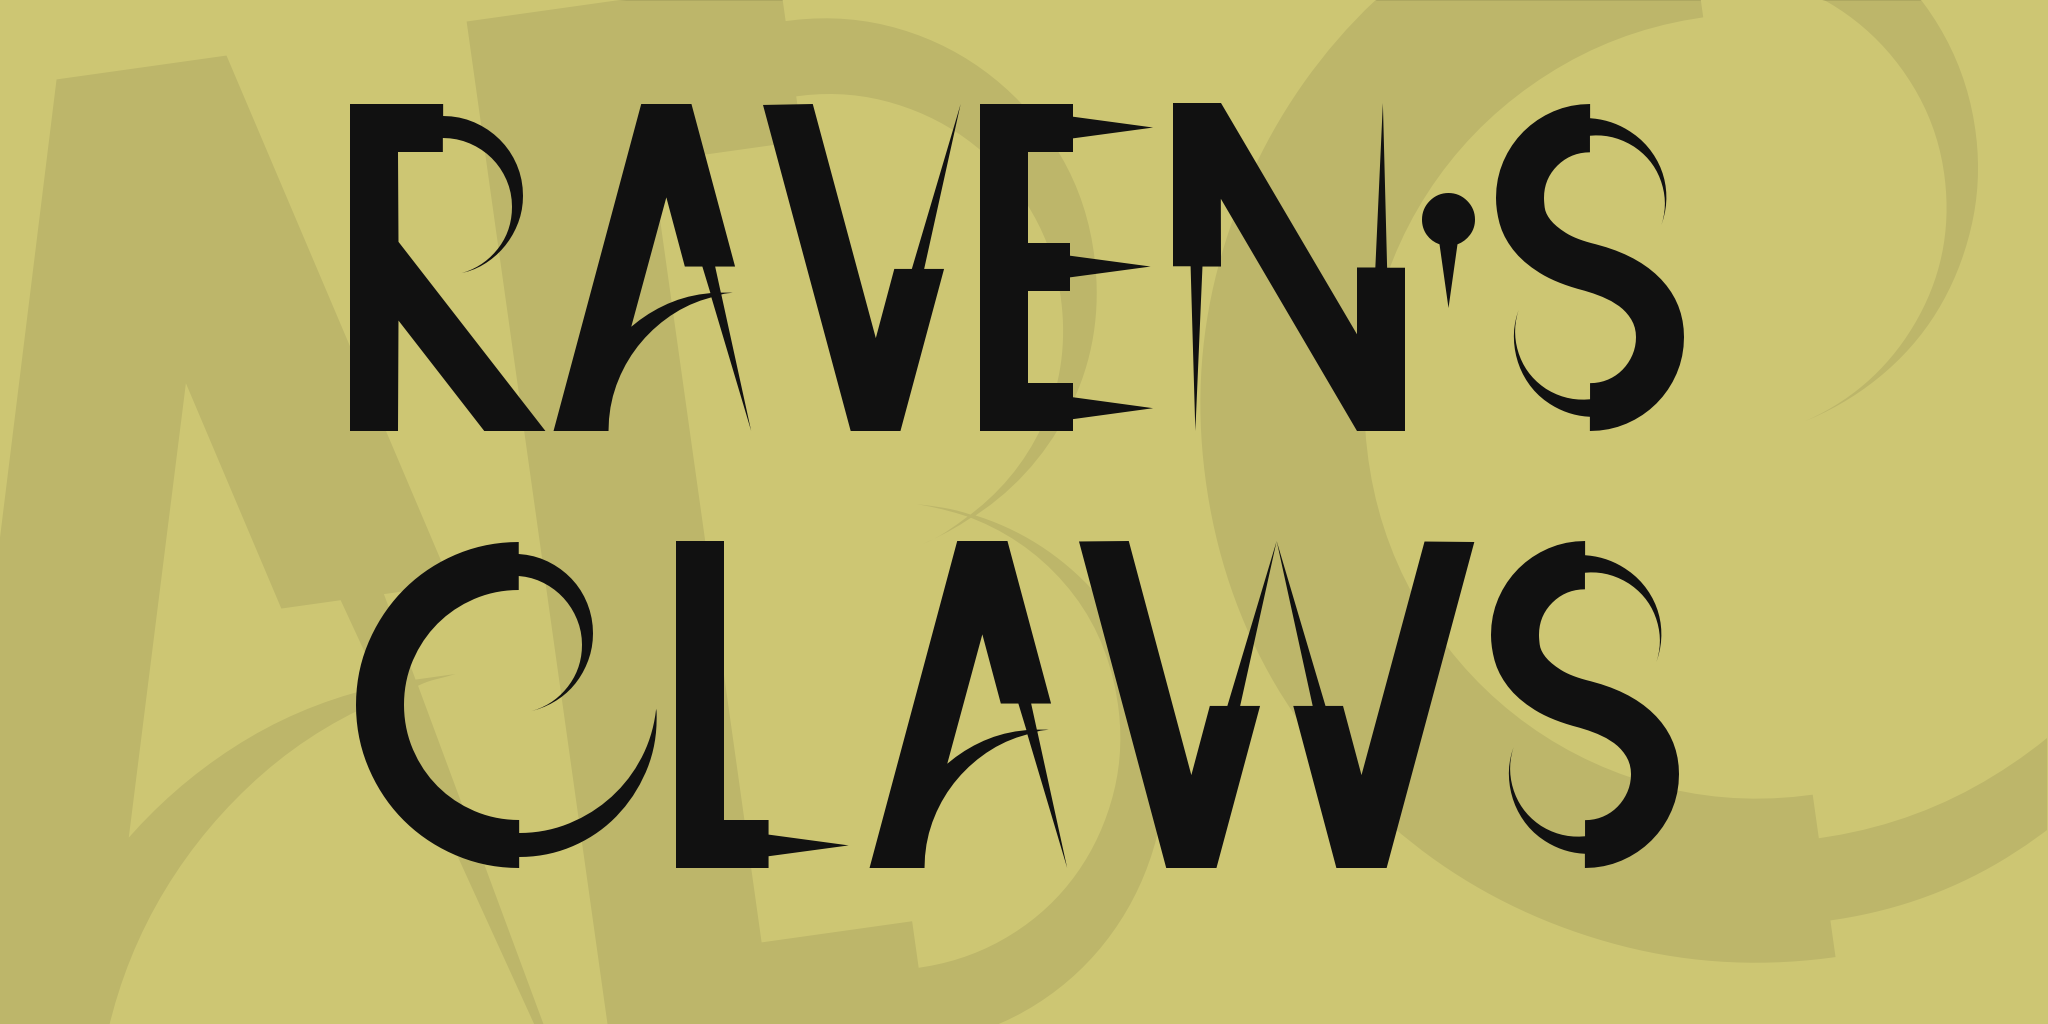 Ravens Claws